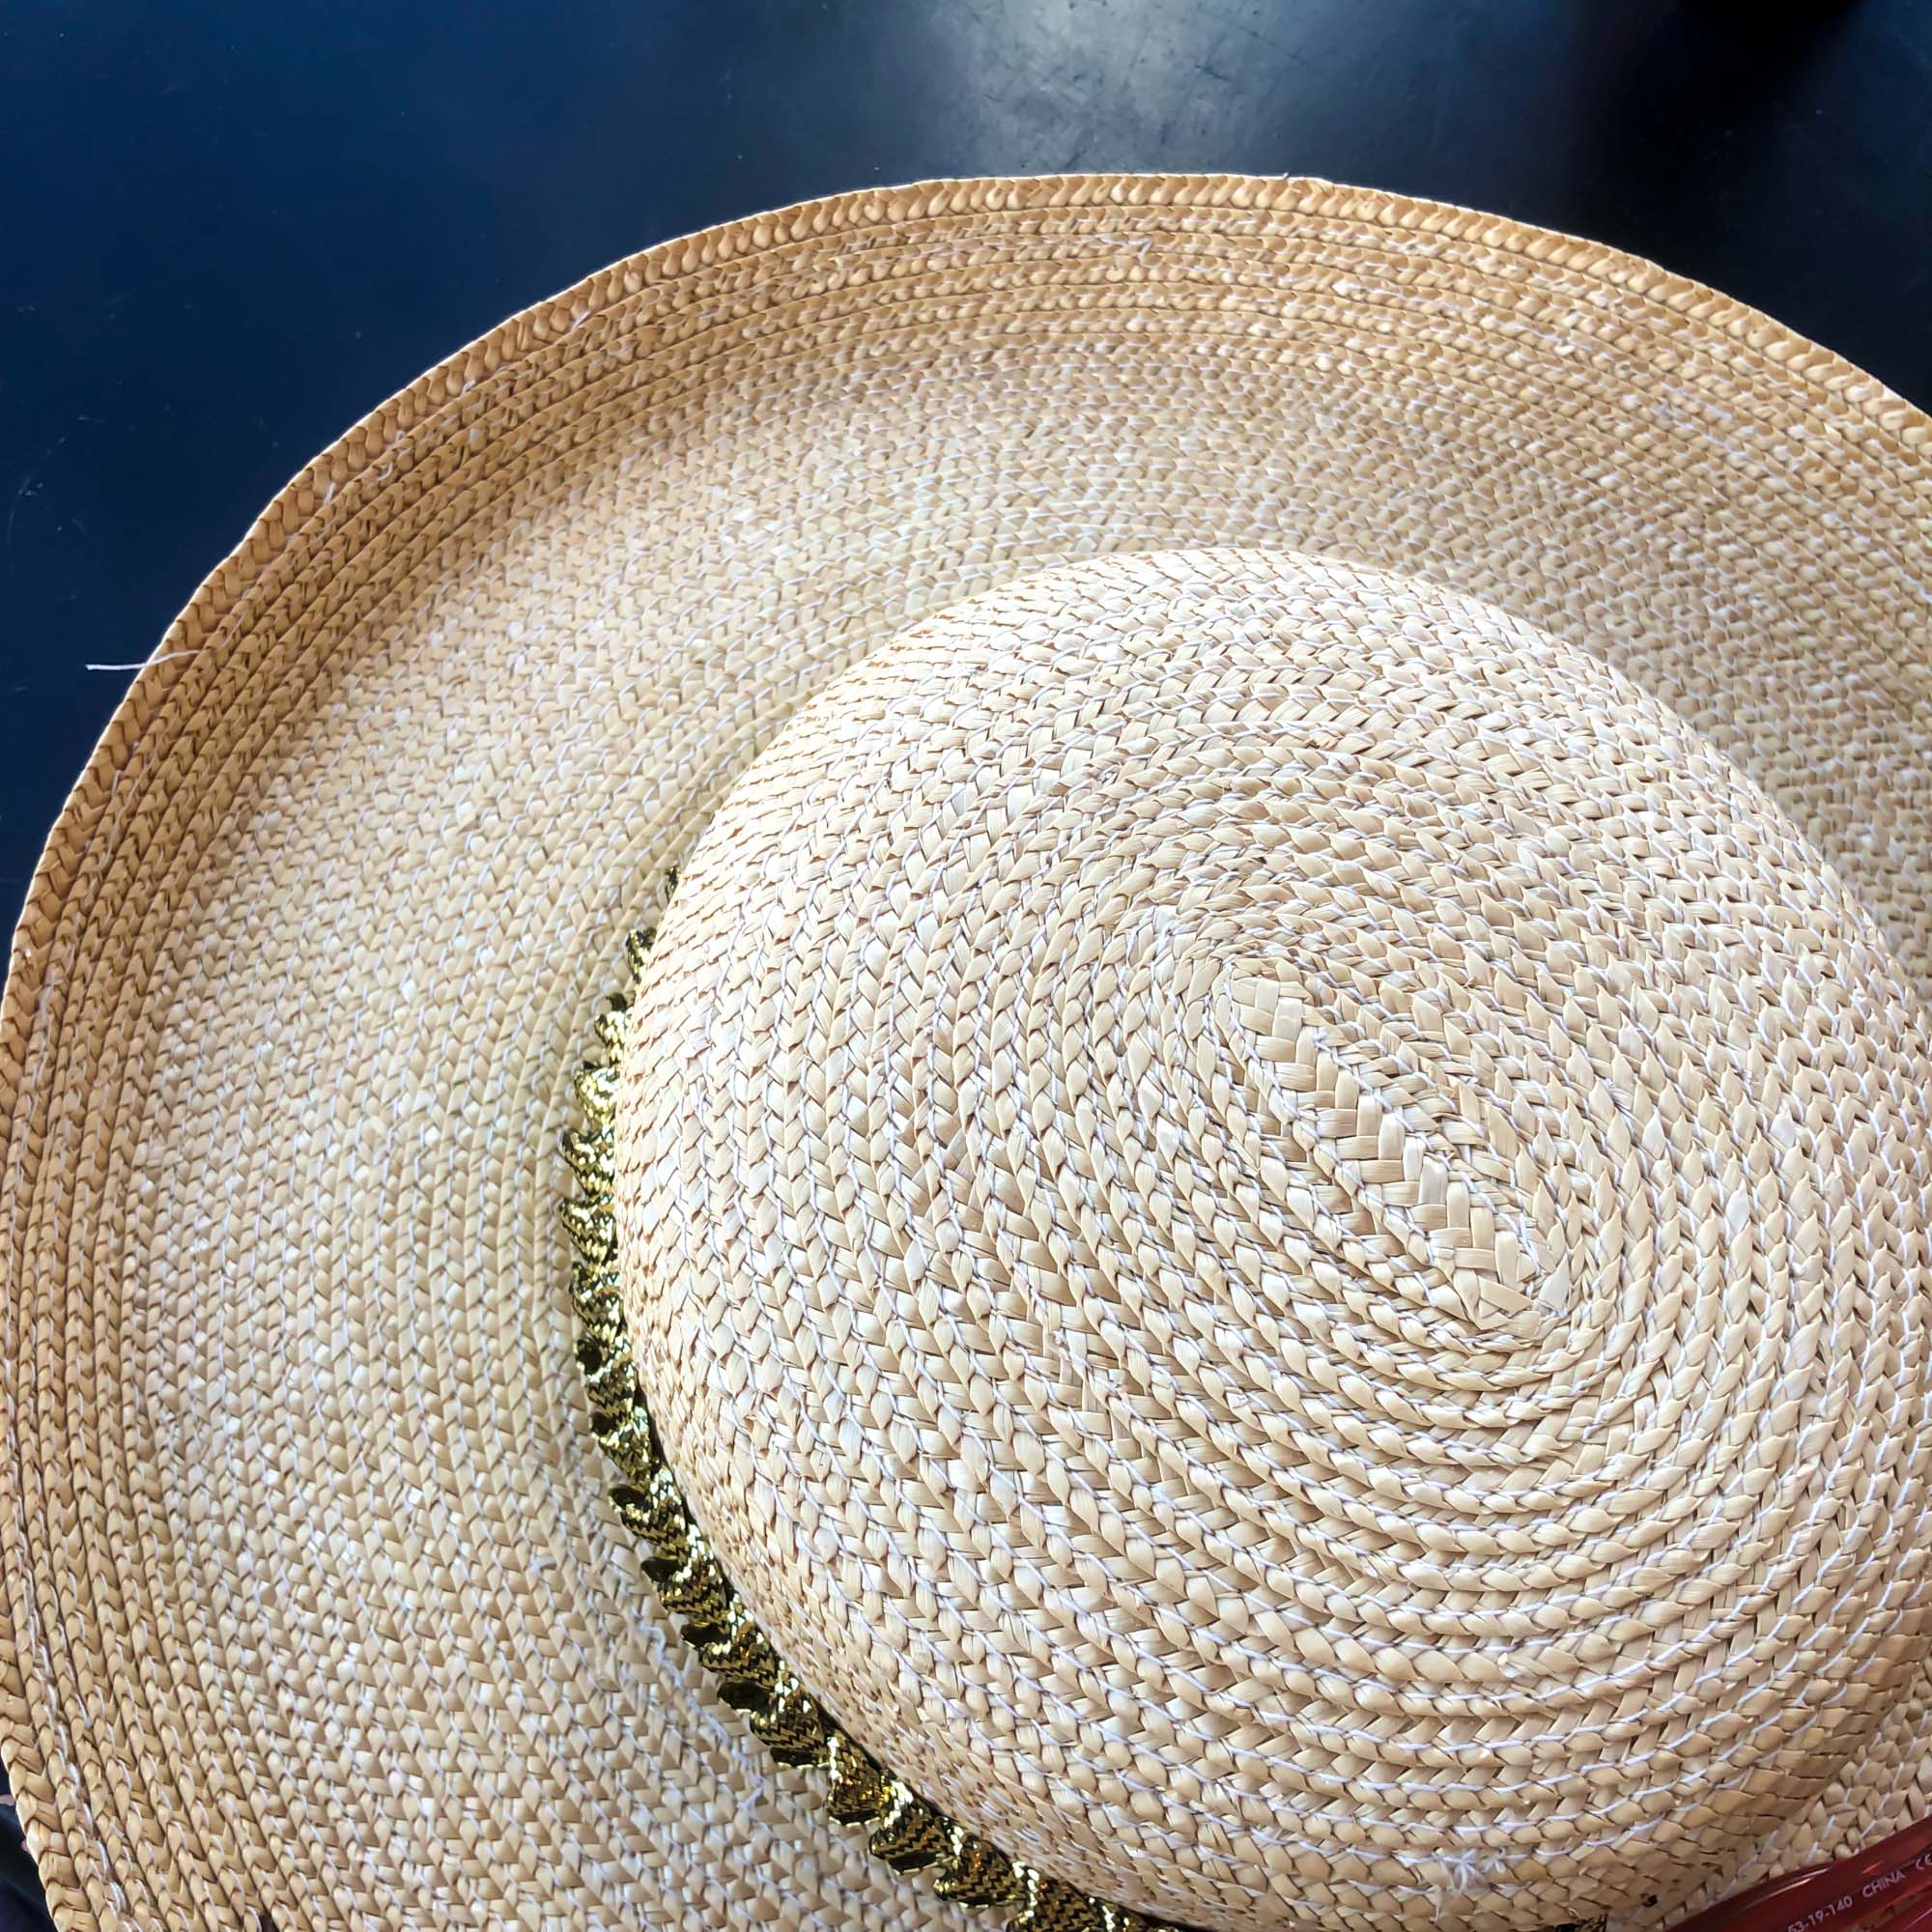 VINTAGE STRAW HAT WITH GOLD BAND